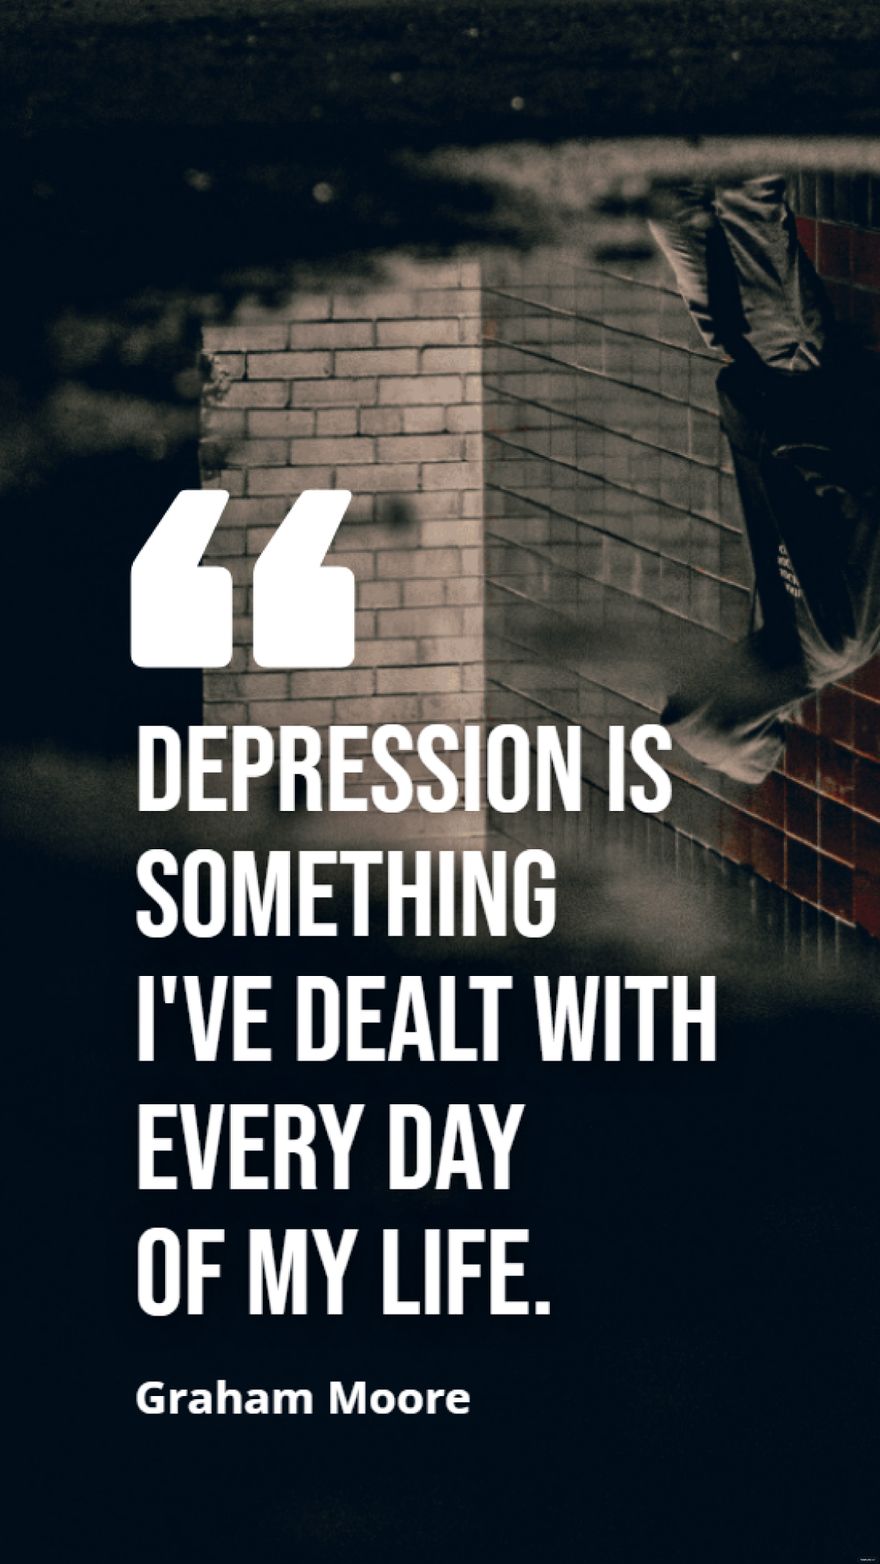 Graham Moore - Depression is something I've dealt with every day of my life.